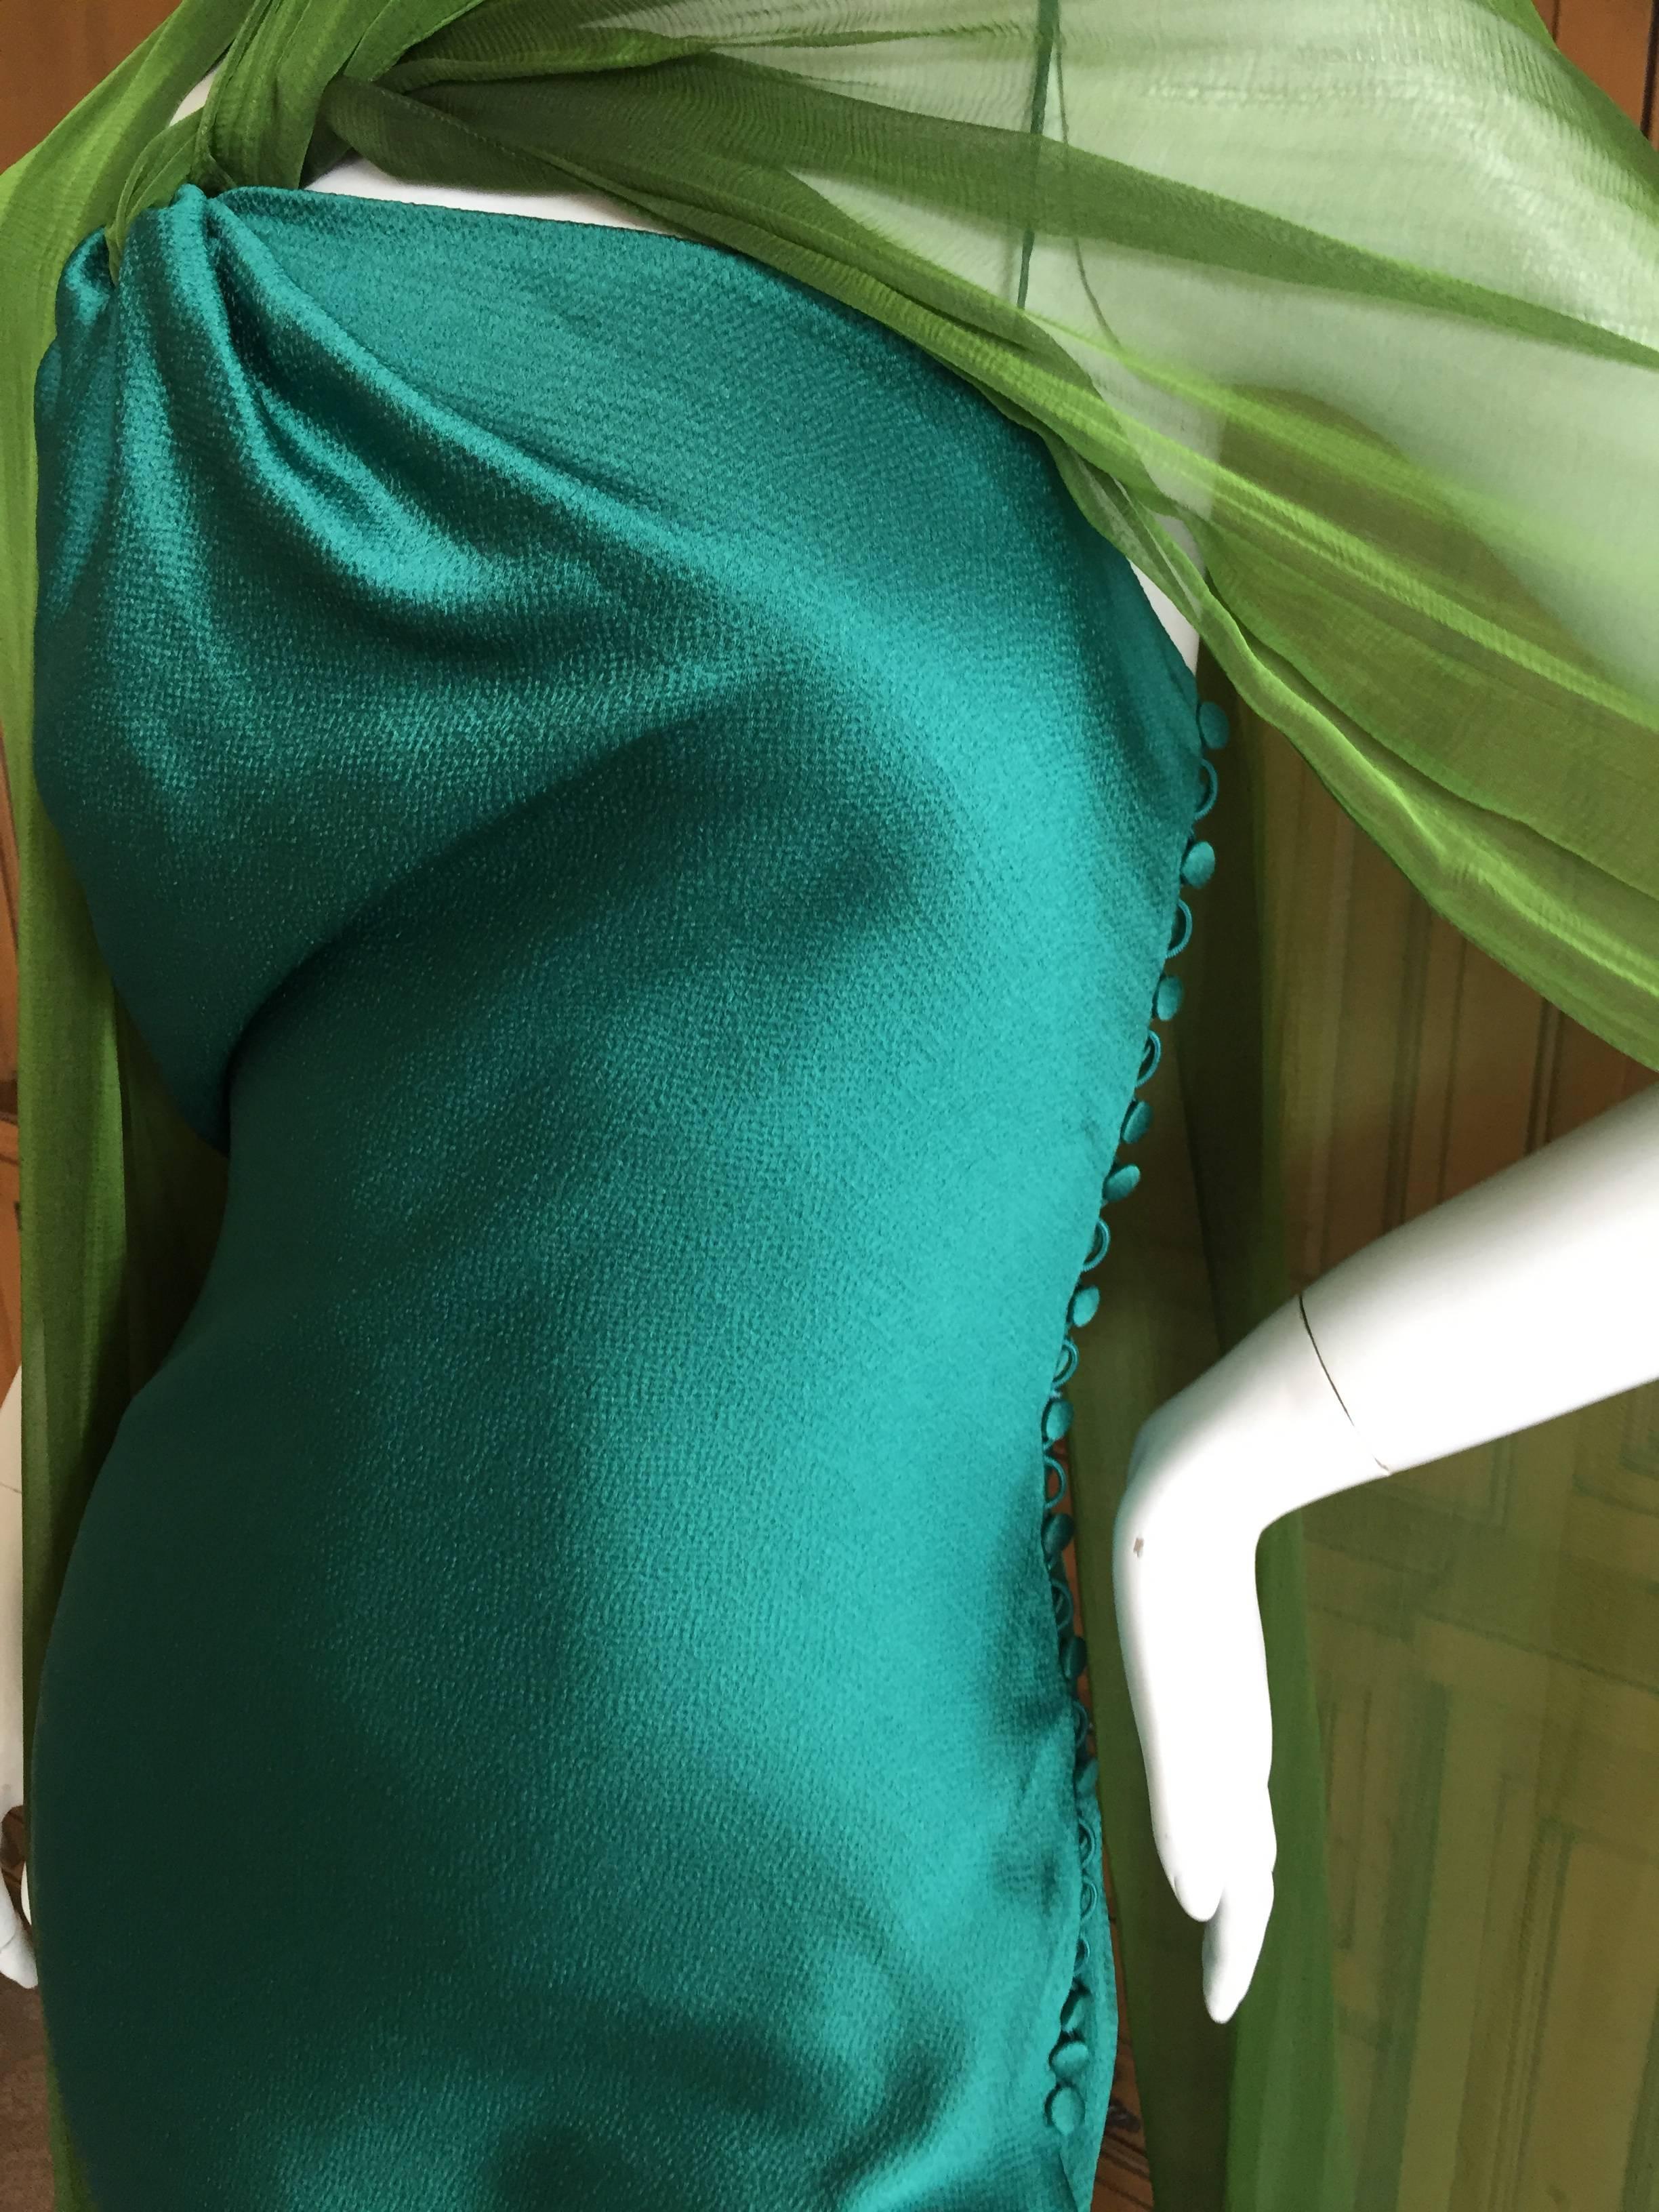 Christian Dior by Galliano Bias Cut Green Dress w Ermine Tail Trim Scarves 1990s In Excellent Condition In Cloverdale, CA